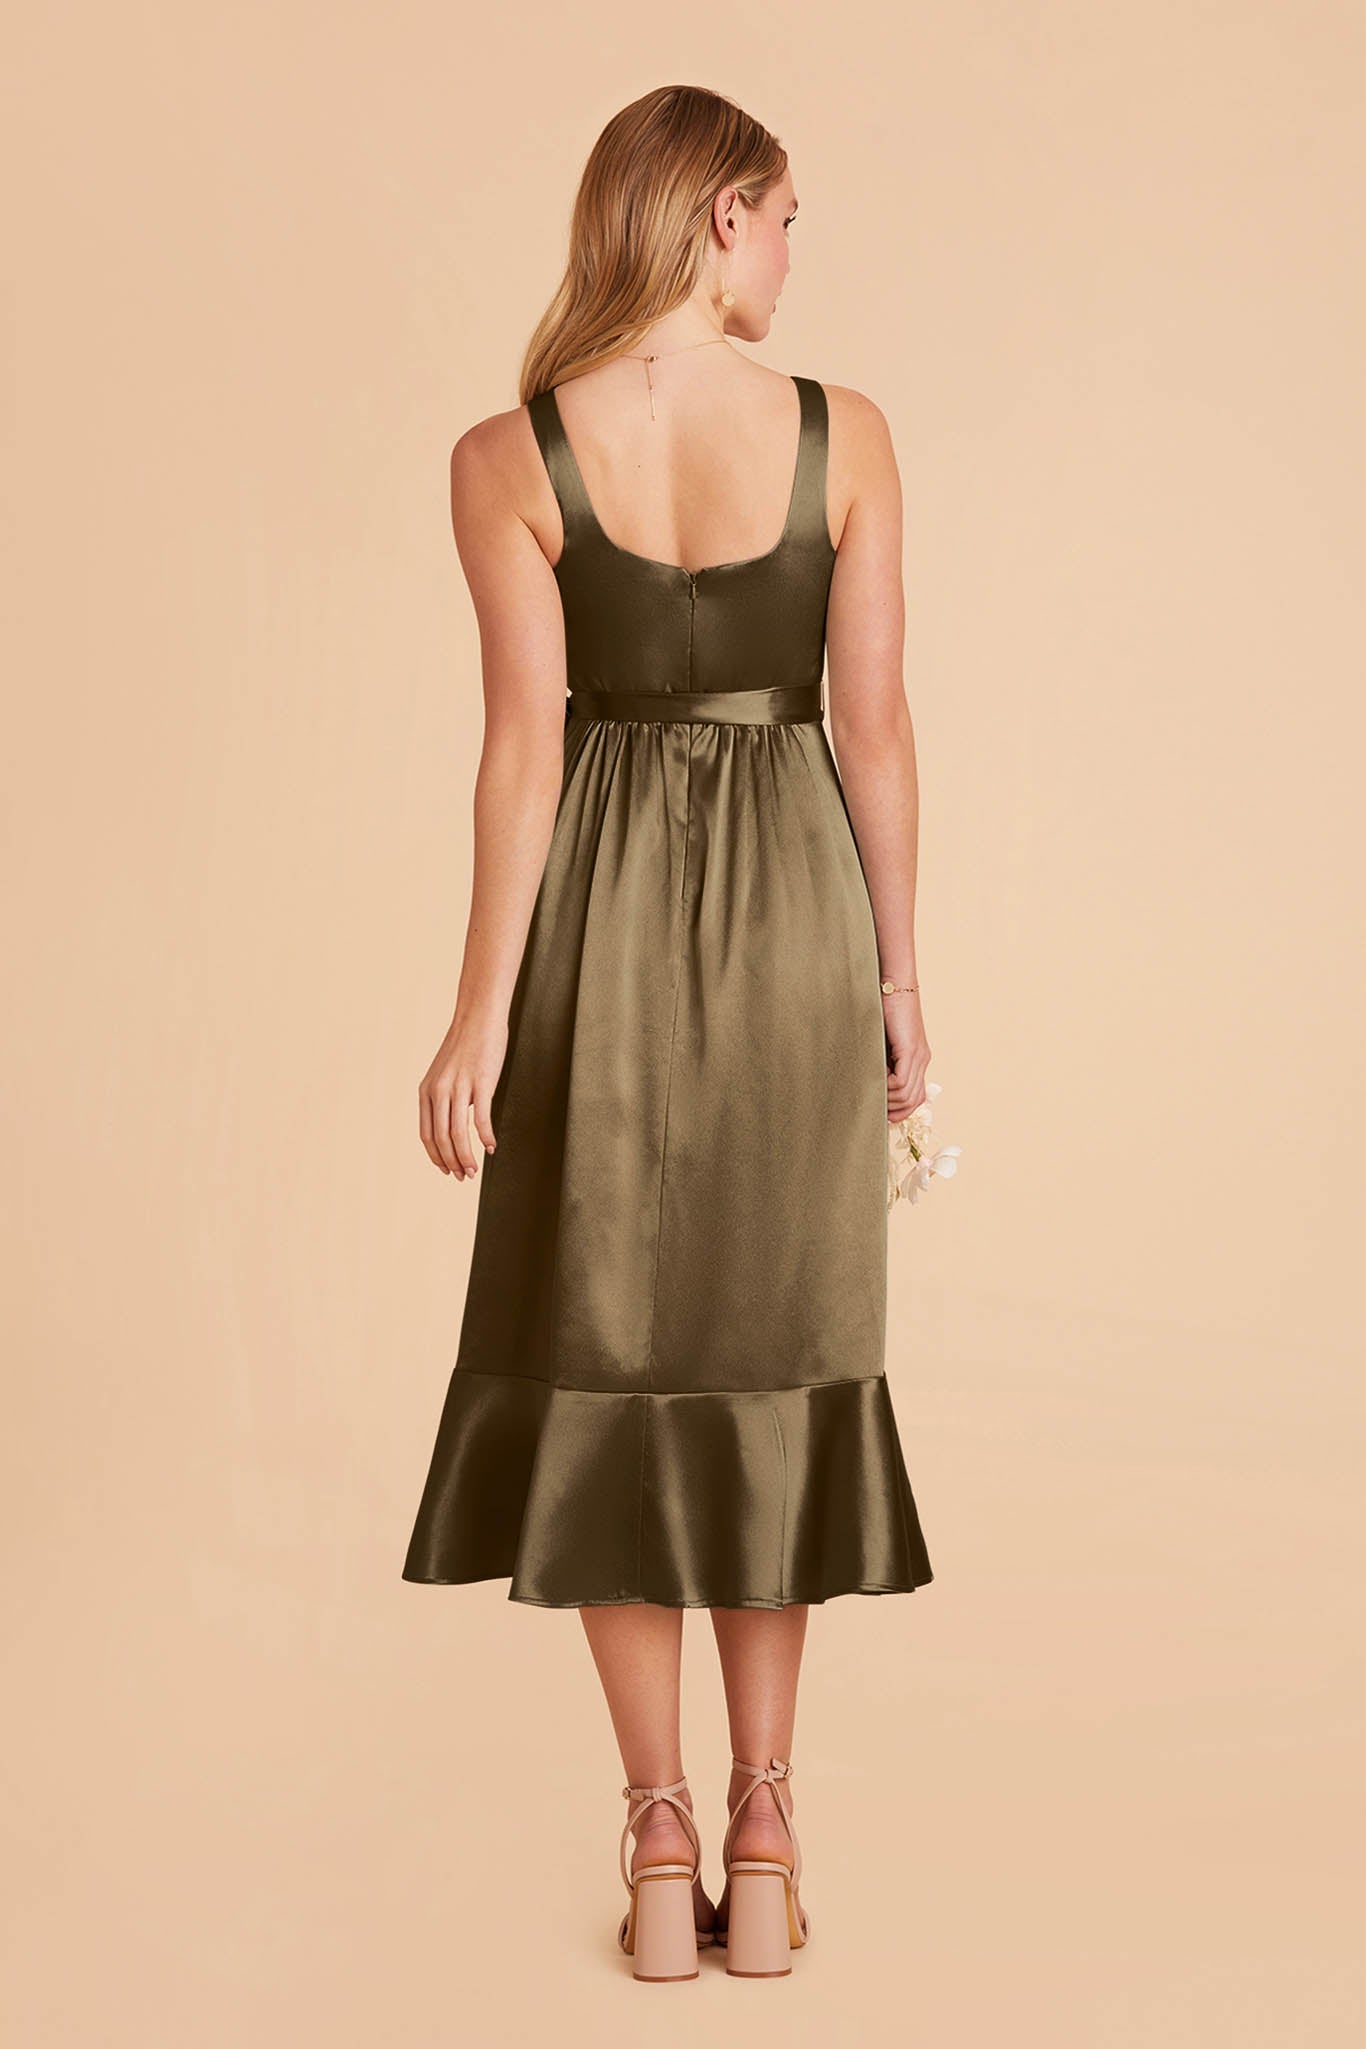 Olive Eugenia Convertible Midi Dress by Birdy Grey